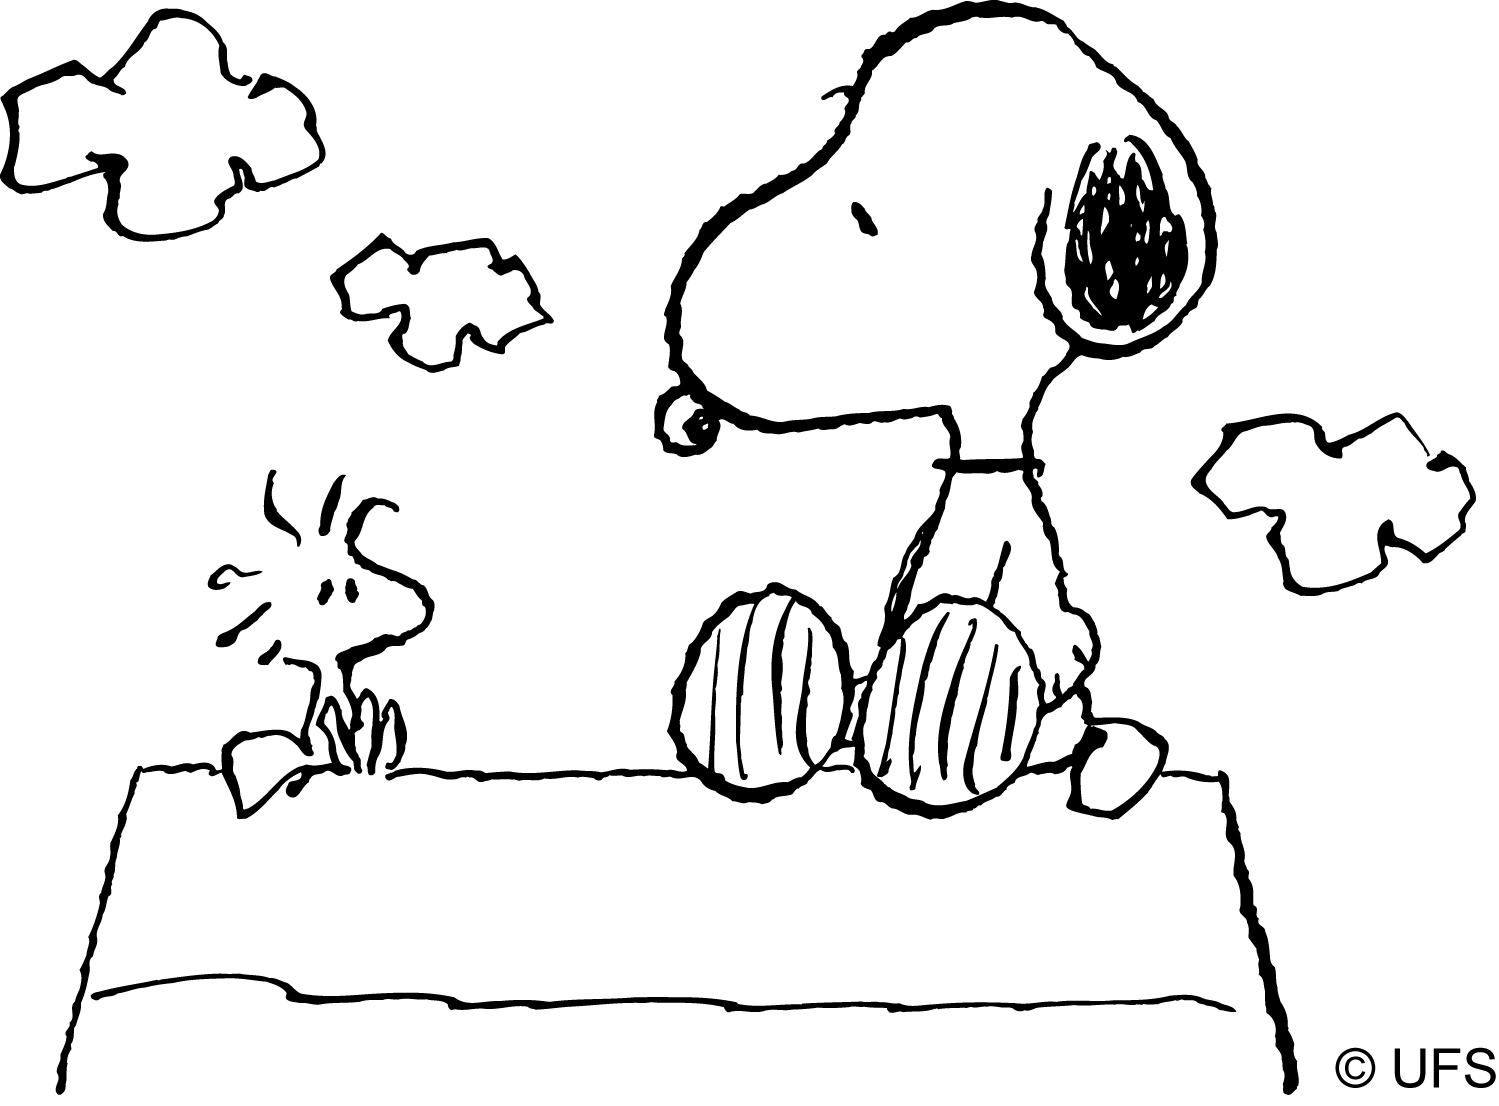 Snoopy #7 (Cartoons) – Printable coloring pages